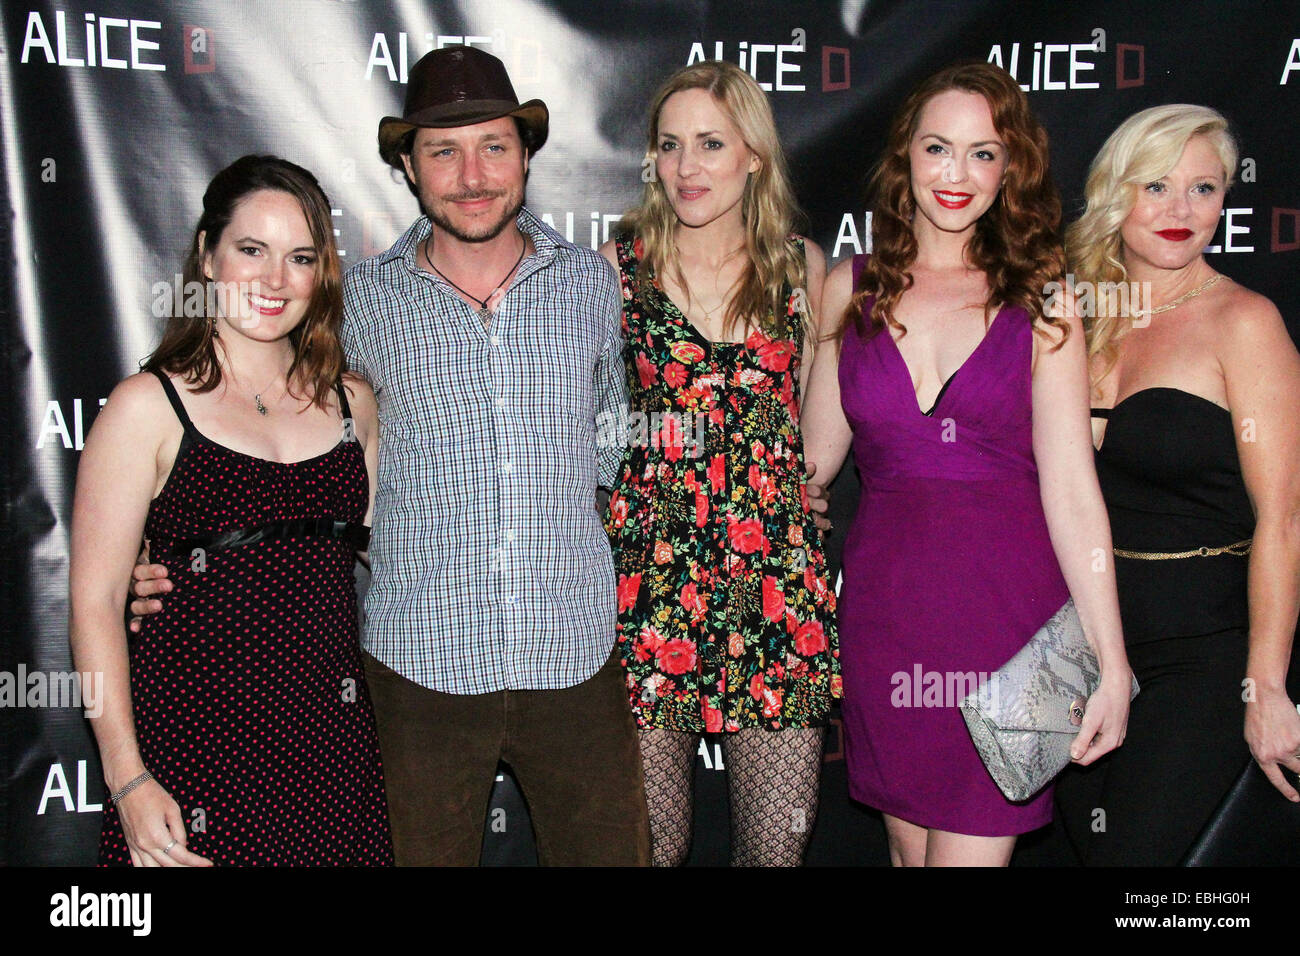 'Alice D' Los Angeles Premiere - Arrivals  Featuring: Sarah Nicklin,Michael Reed,Jessica Sonneborn,Eliza Swenson,Noël Thurman Where: Los Angeles, California, United States When: 28 May 2014 Stock Photo